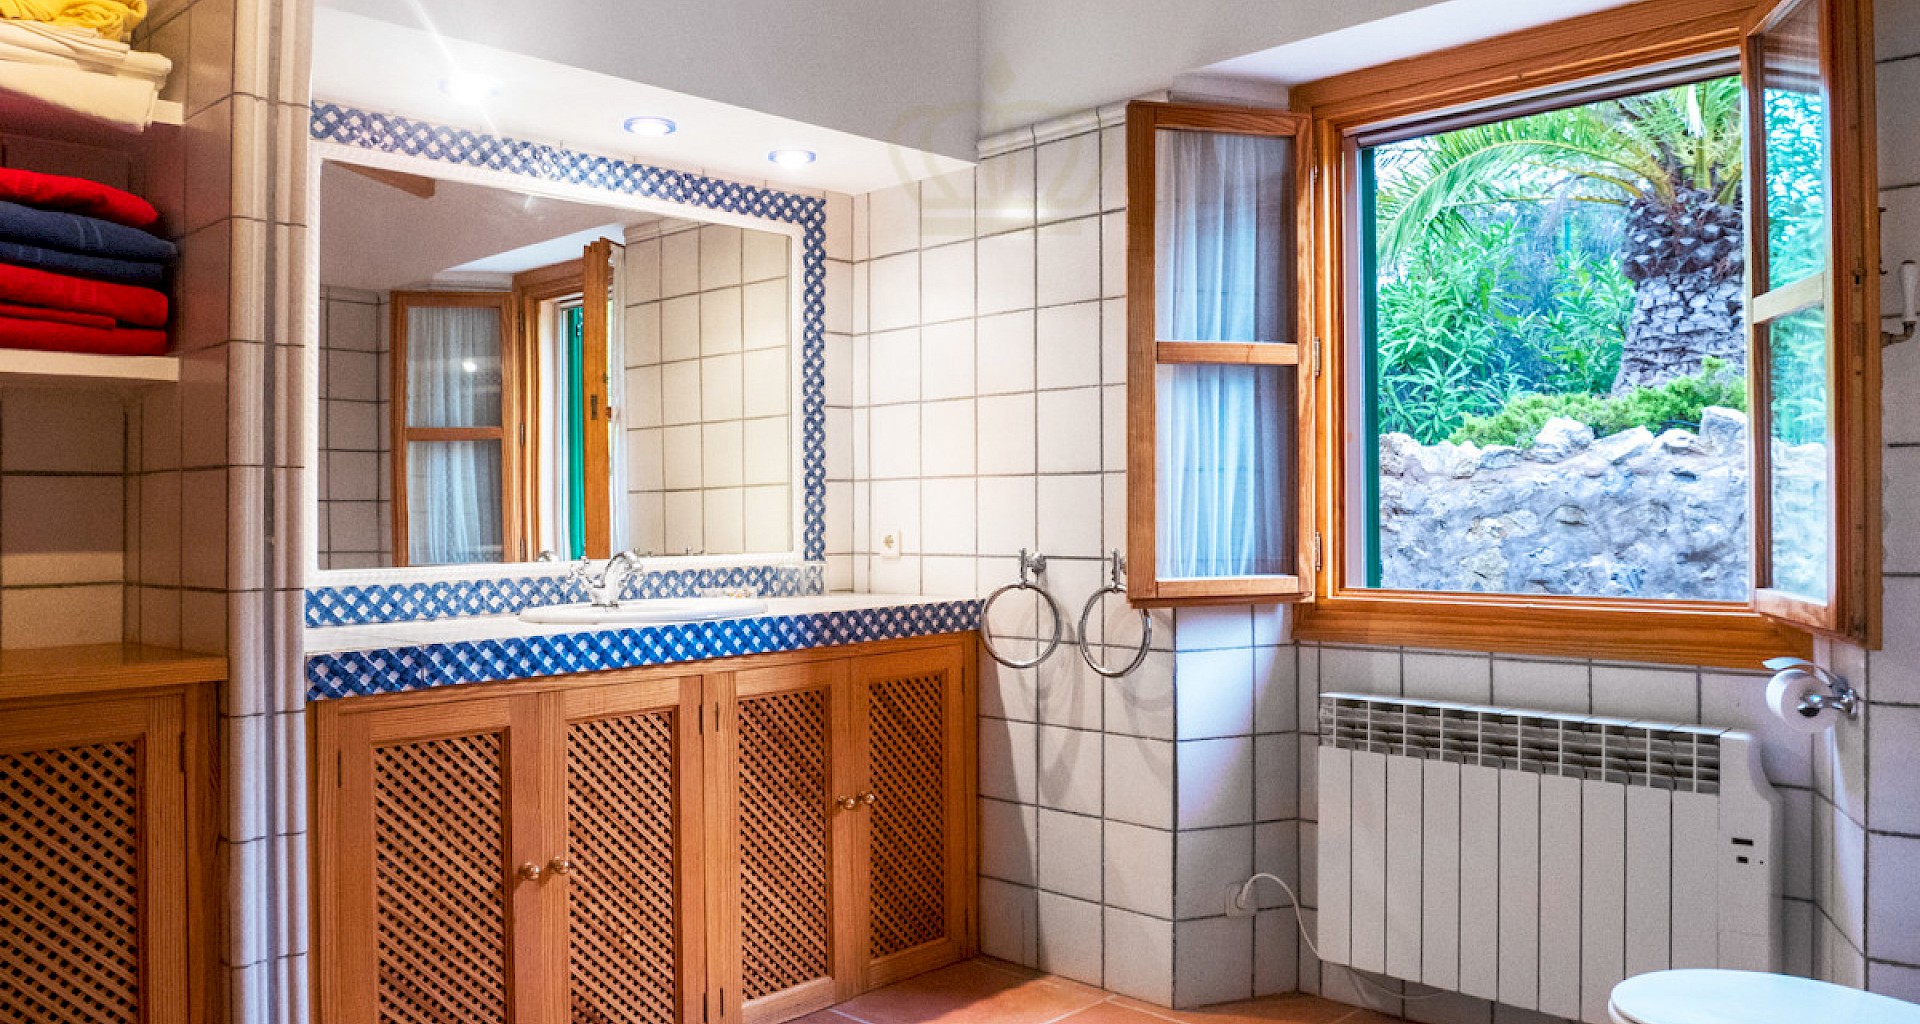 KROHN & LUEDEMANN Mediterranean Finca with guesthouse and panoramic views in Es Capdella 28 Bathroom Guest house - Finca Es Capdella